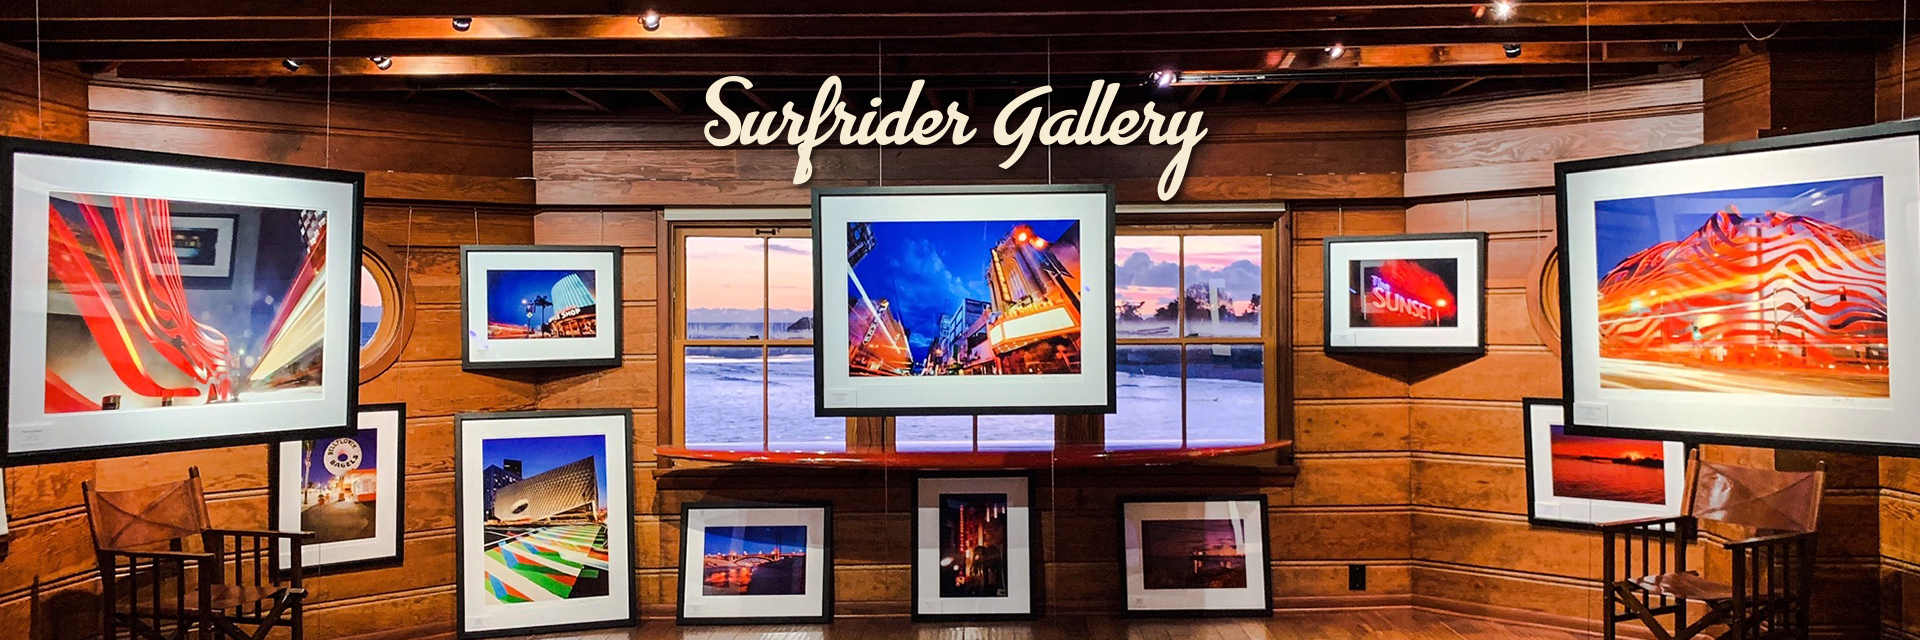 Surfrider Gallery | Multiple images hung on a wall made of wood